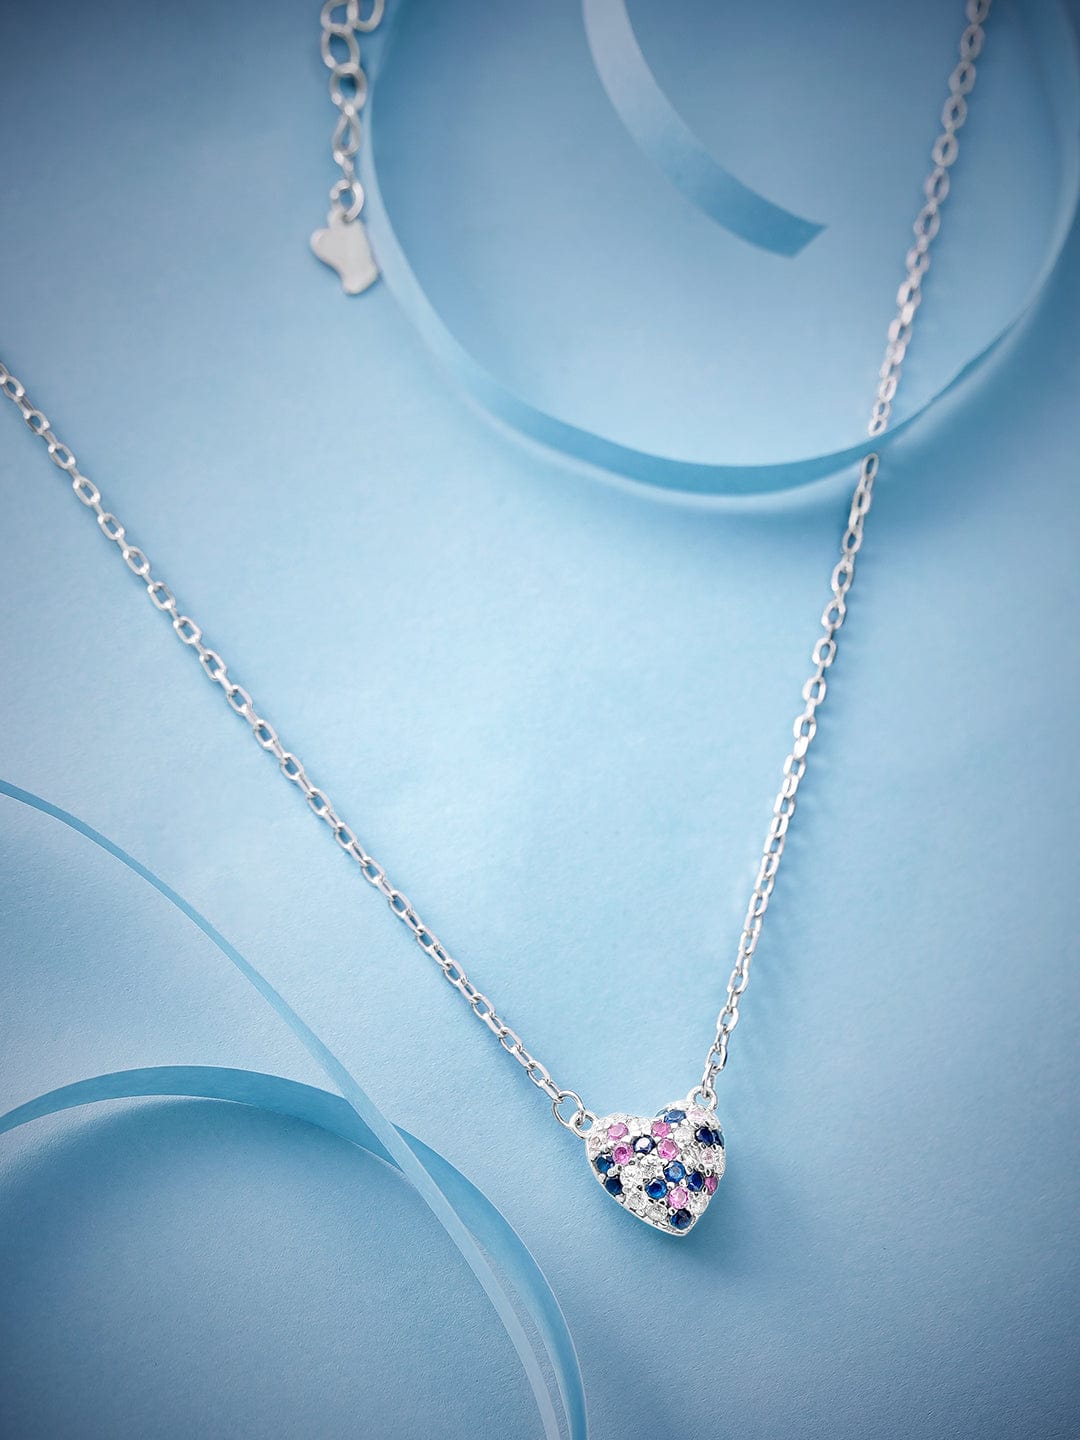 The Heart Holds Multiple Colours - Necklace Chain & Necklaces